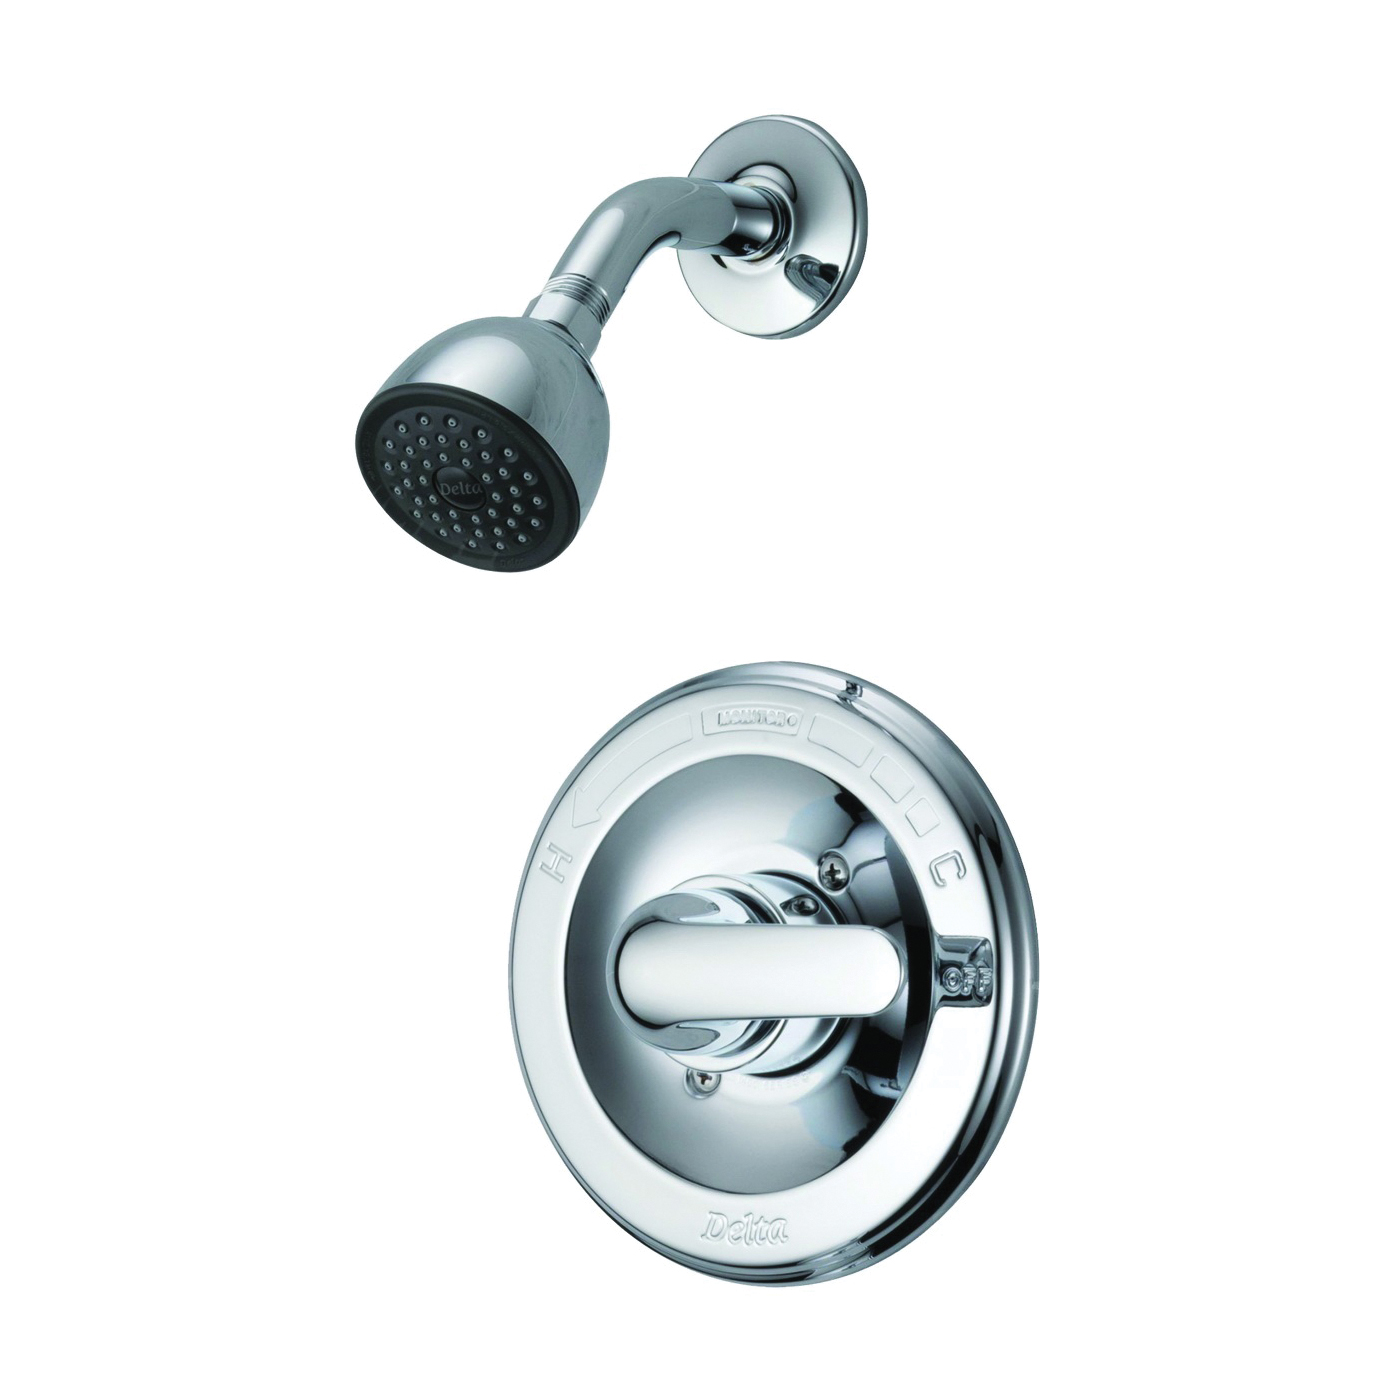 132900 Shower Faucet, 2 gpm, 2-5/8 in Showerhead, Brass, Chrome Plated, Lever Handle, 1-Handle